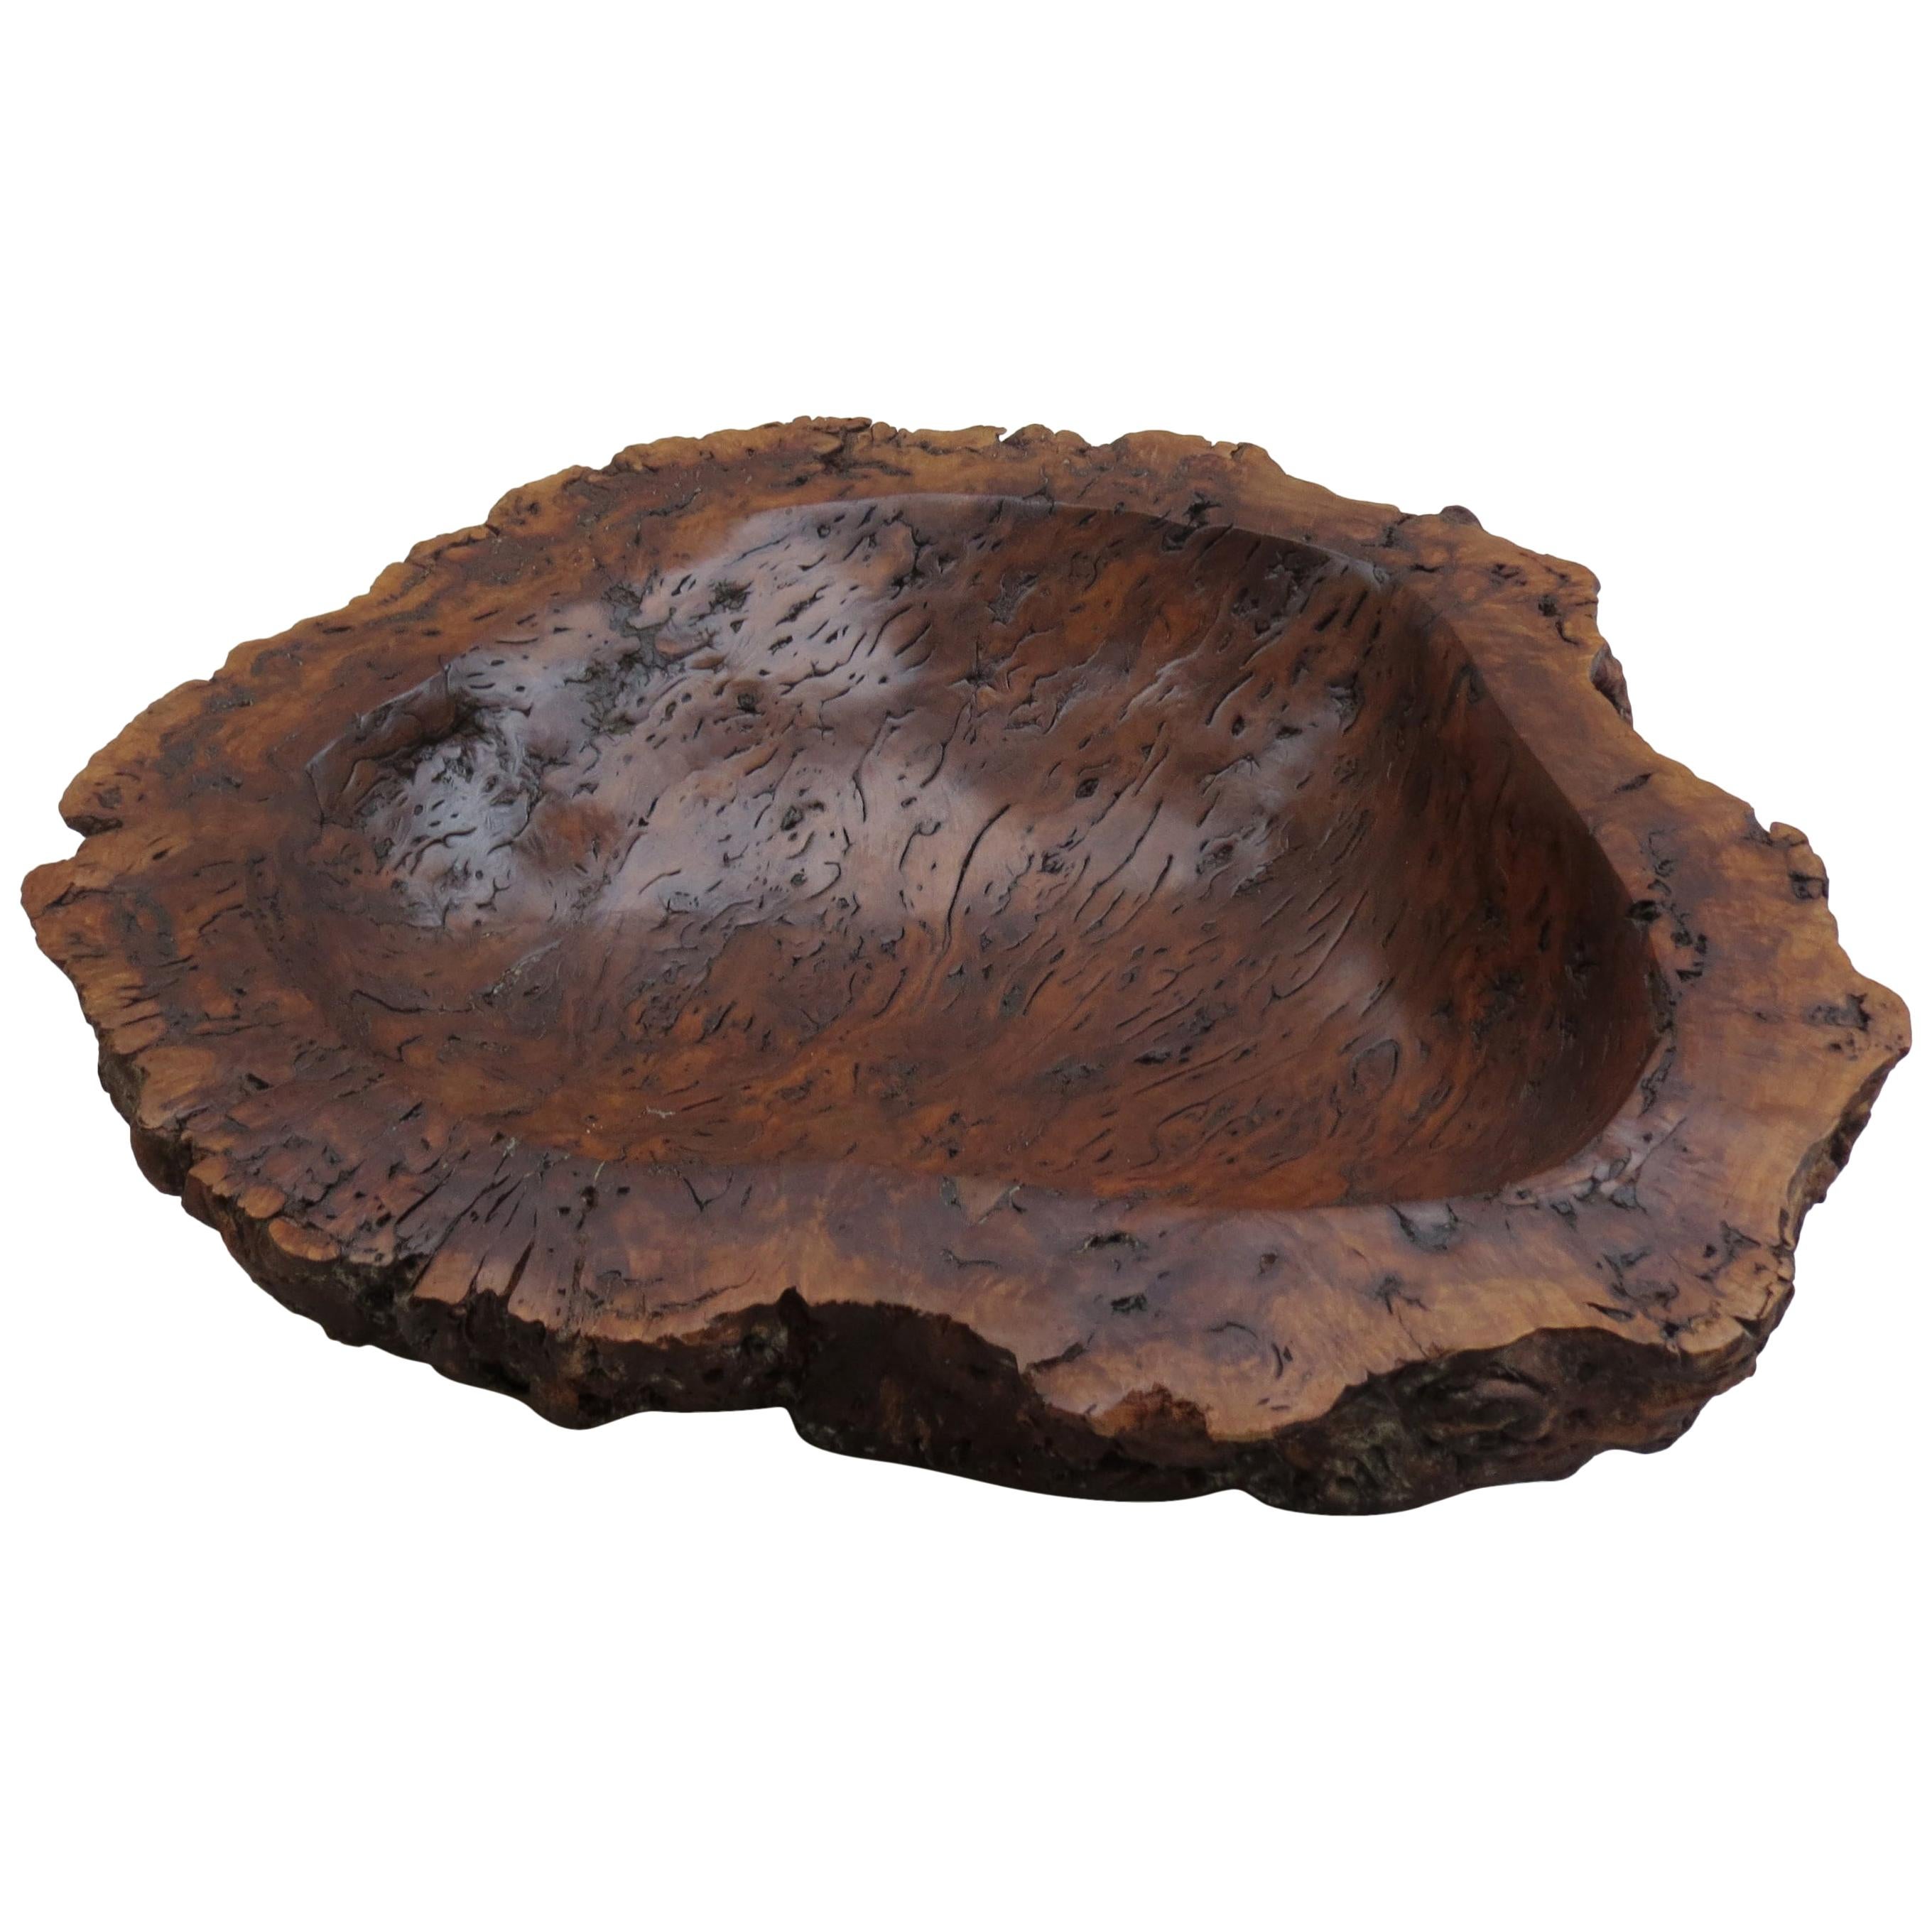 Very Large Hand Produced Bowl in River Red Gum Burr, Australian